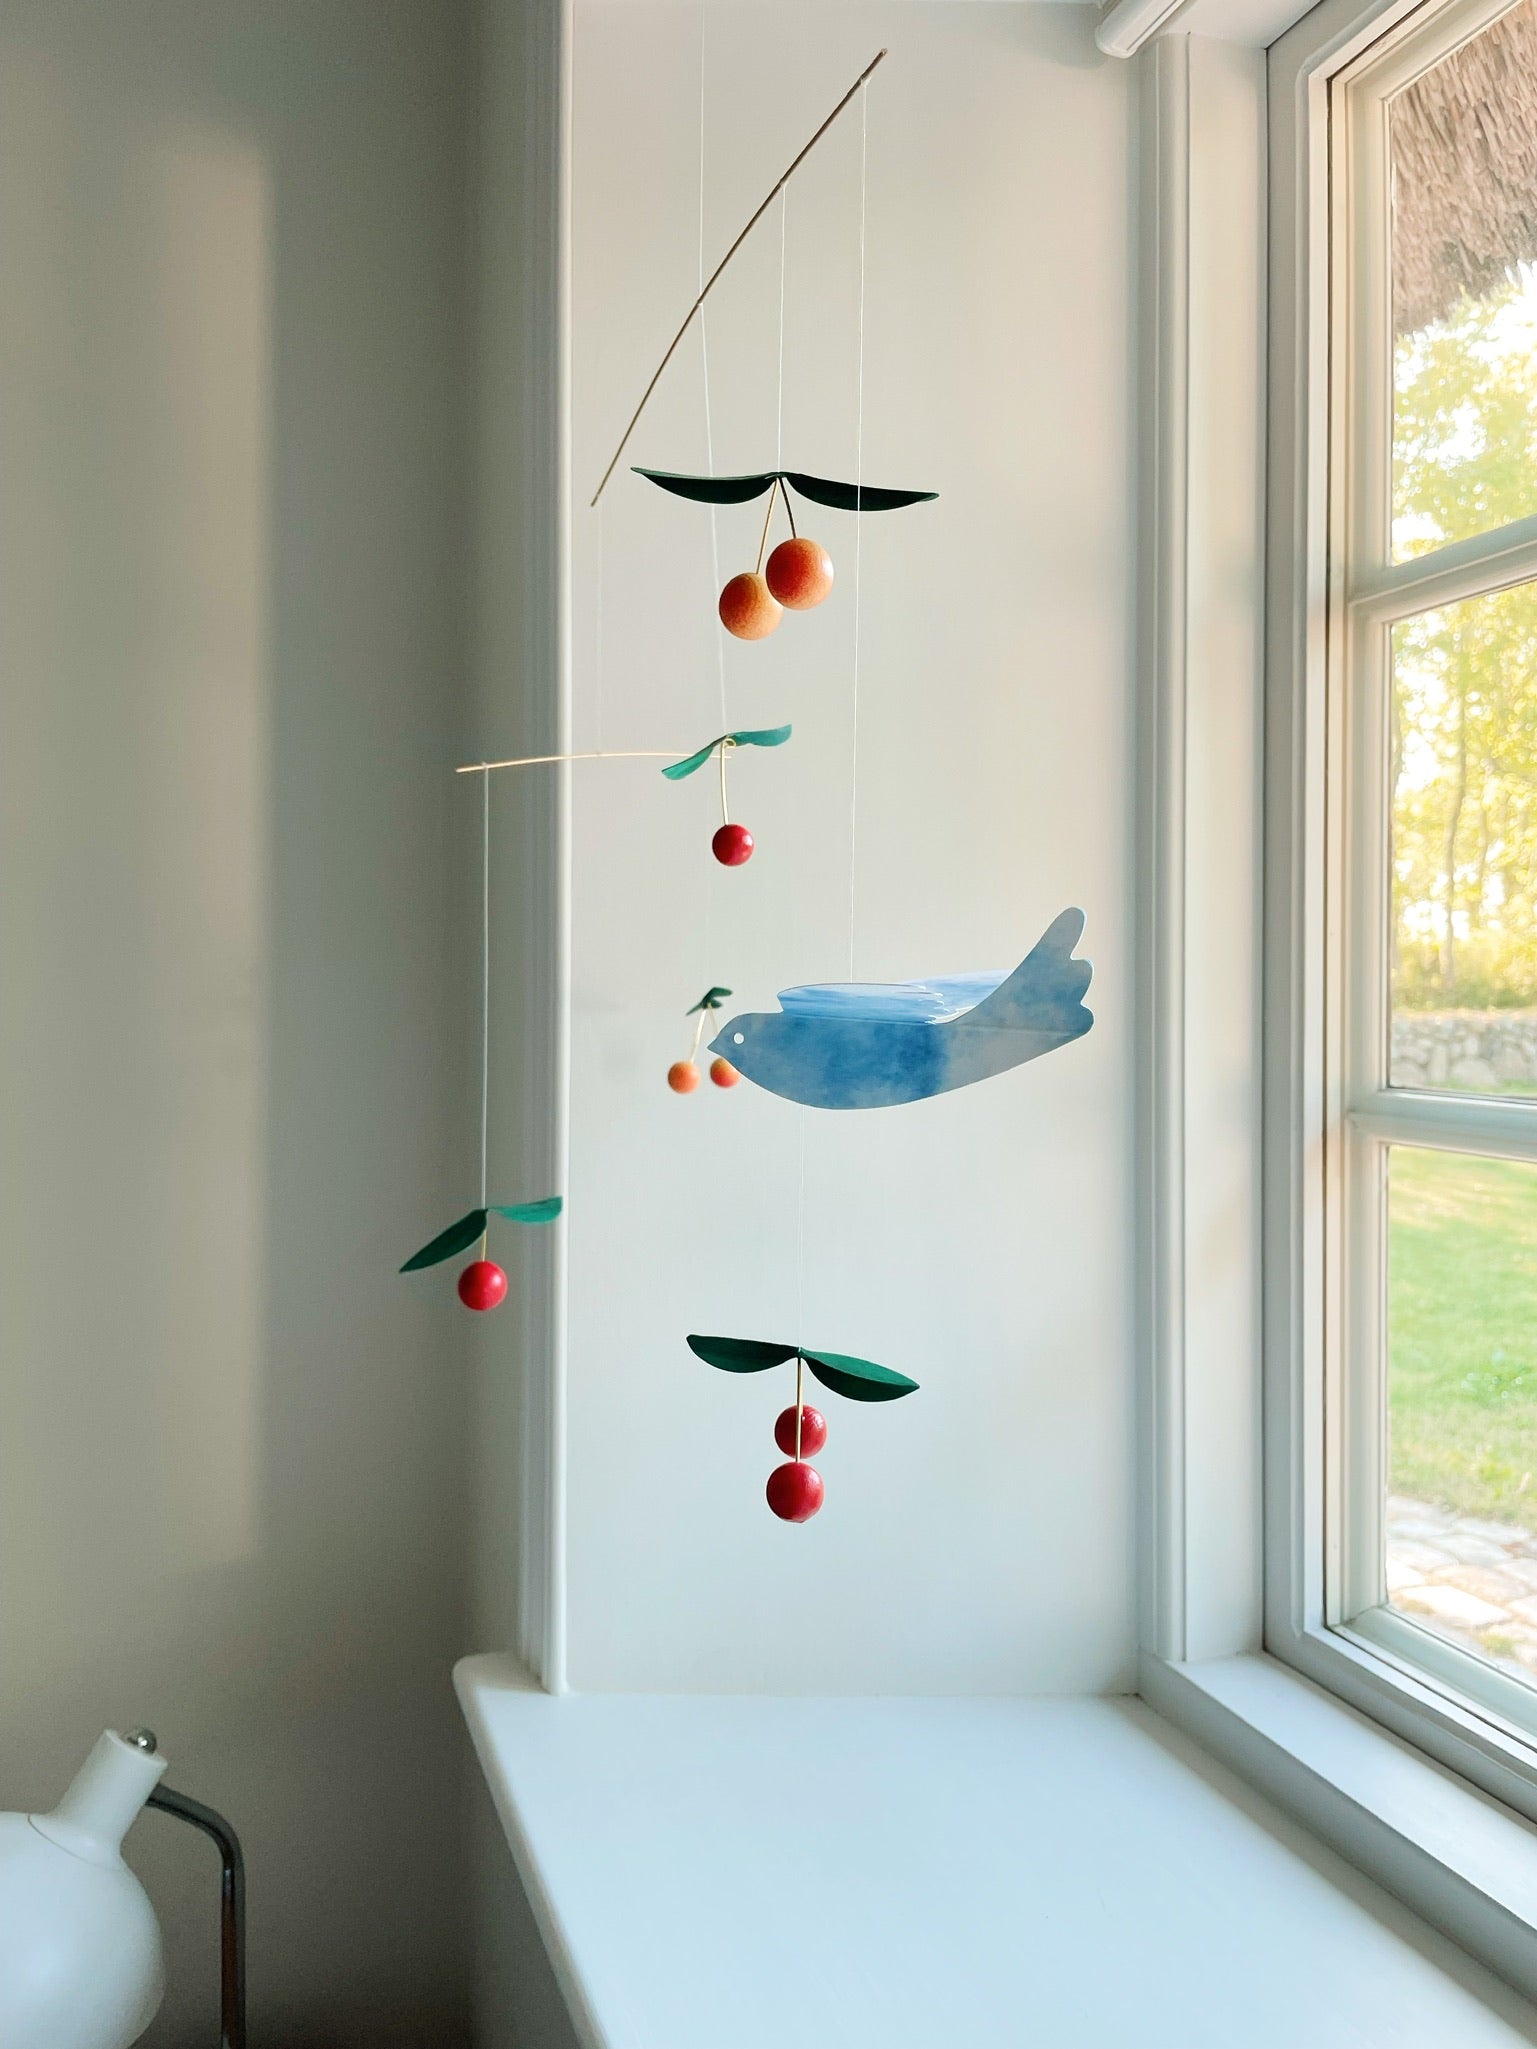 Flensted Mobiles - Cherry Dreams Mobile, brass / wood, multicolored